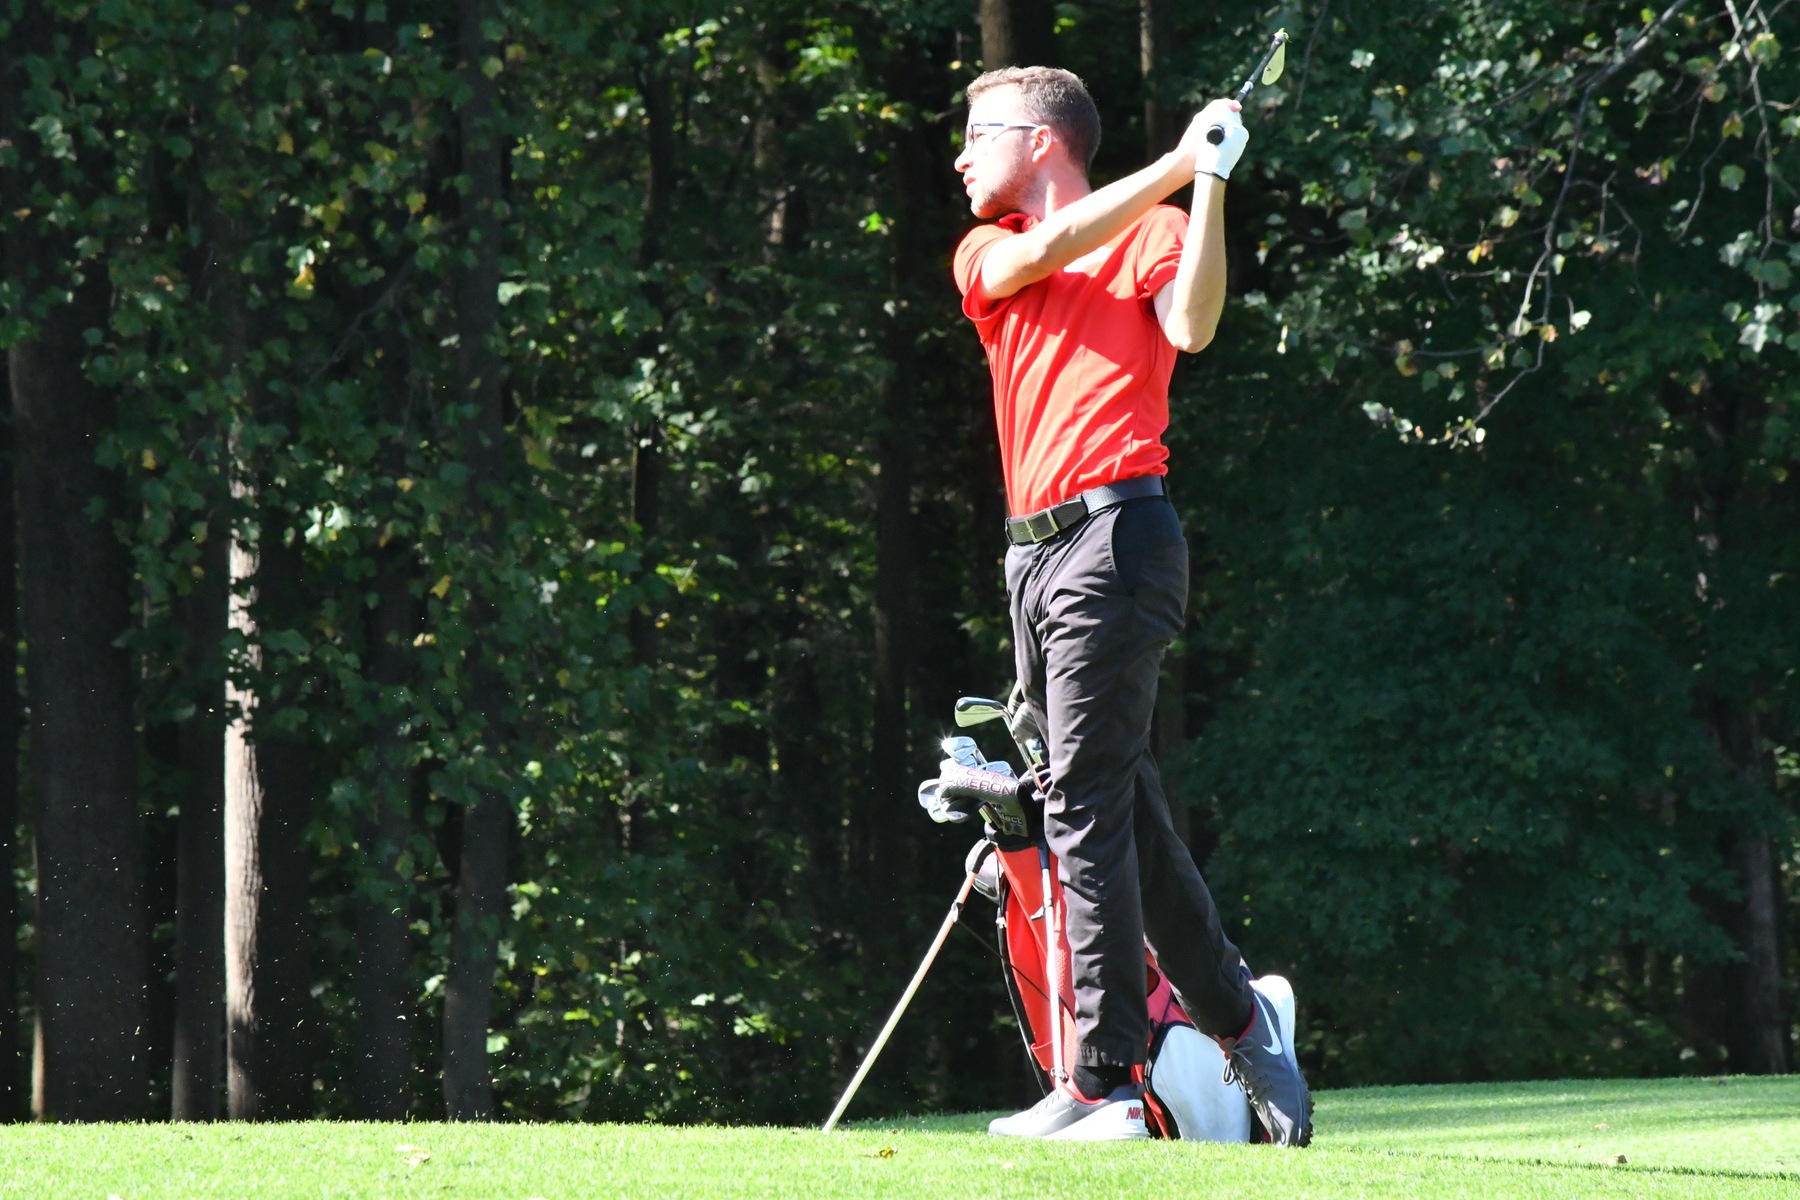 MEN'S GOLF IN TIE FOR FOURTH PLACE AFTER ROUND ONE OF NCAA D2 ATLANTIC/EAST SUPER REGIONAL